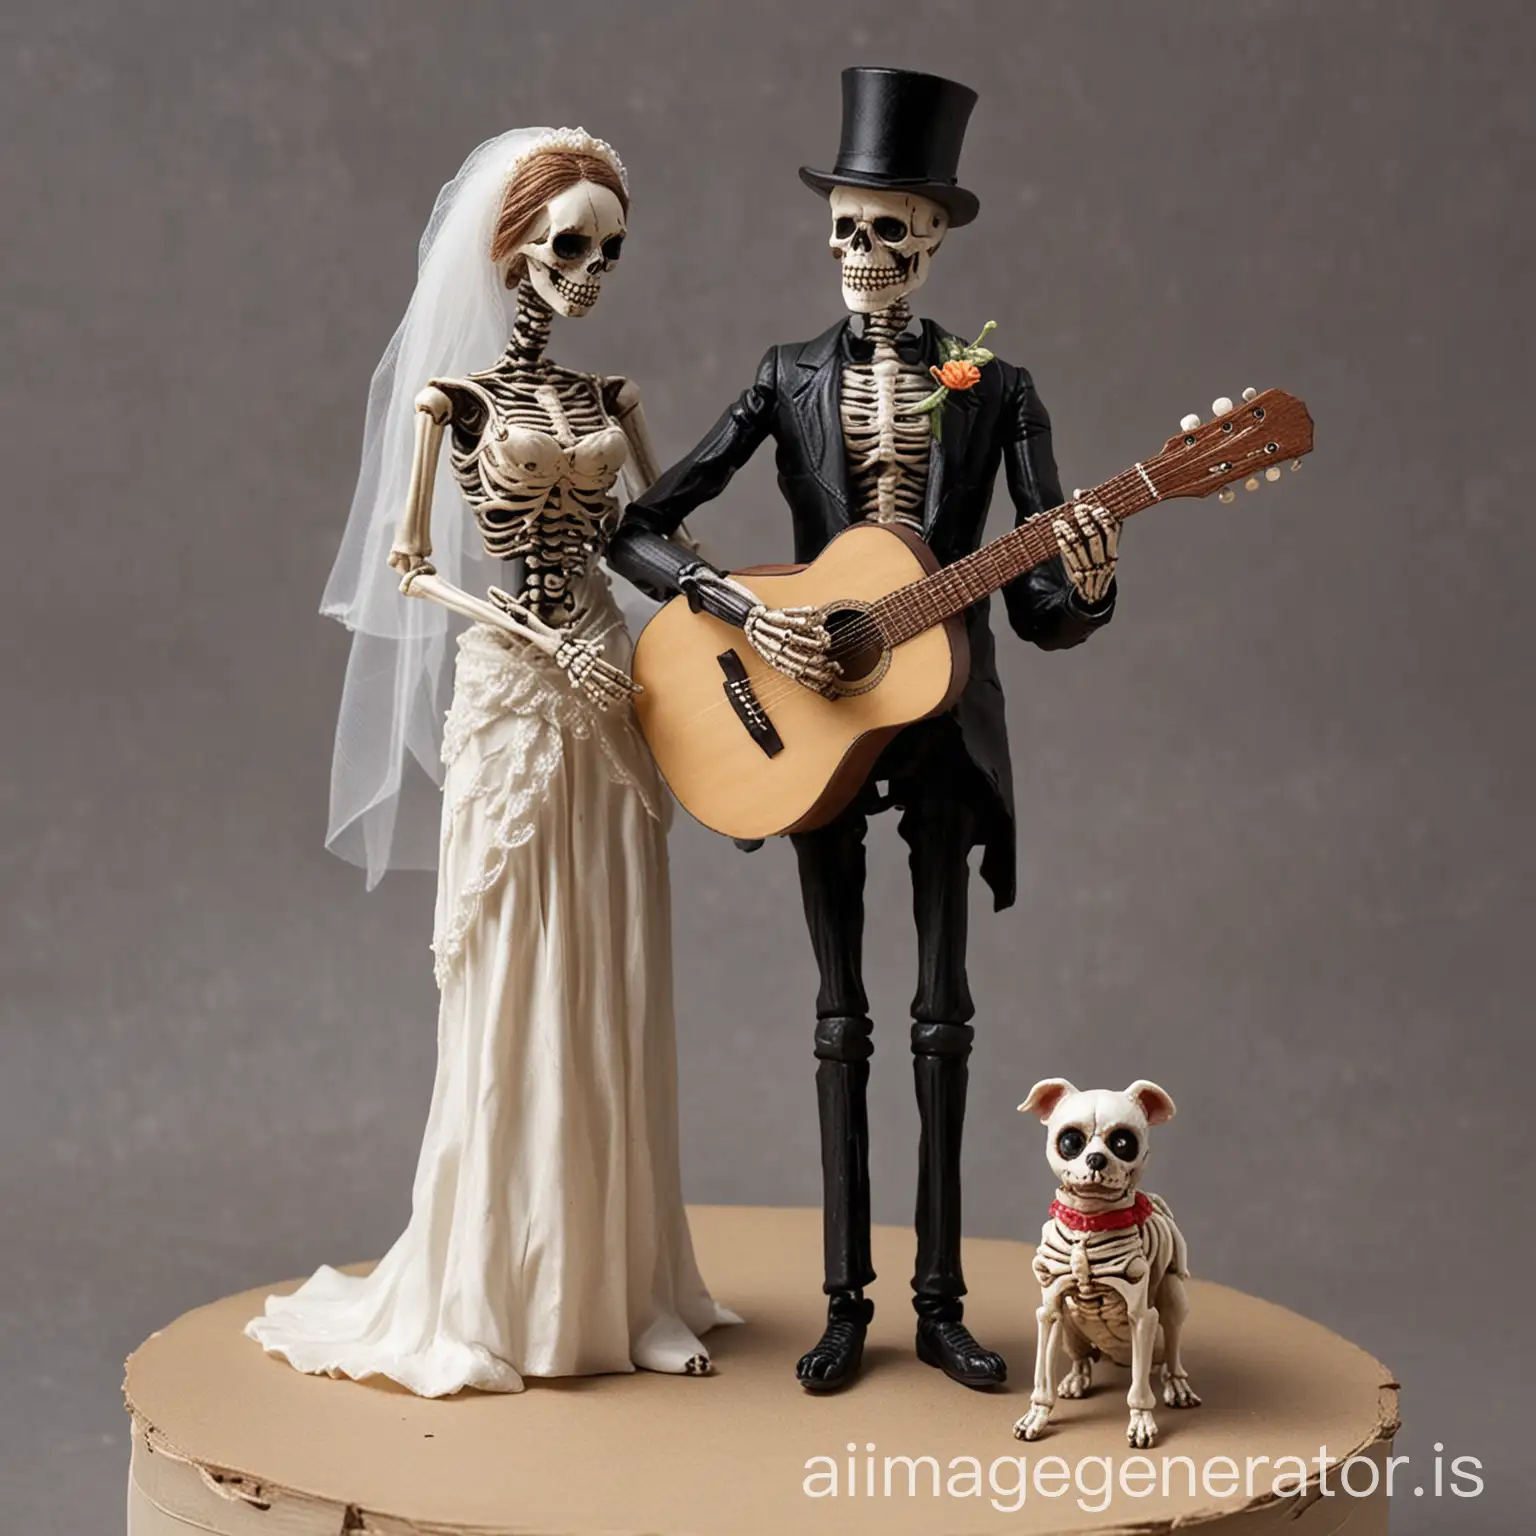 Skeleton bride and skeleton groom hold hands. Groom holds a guitar. there is a small skeleton dog.